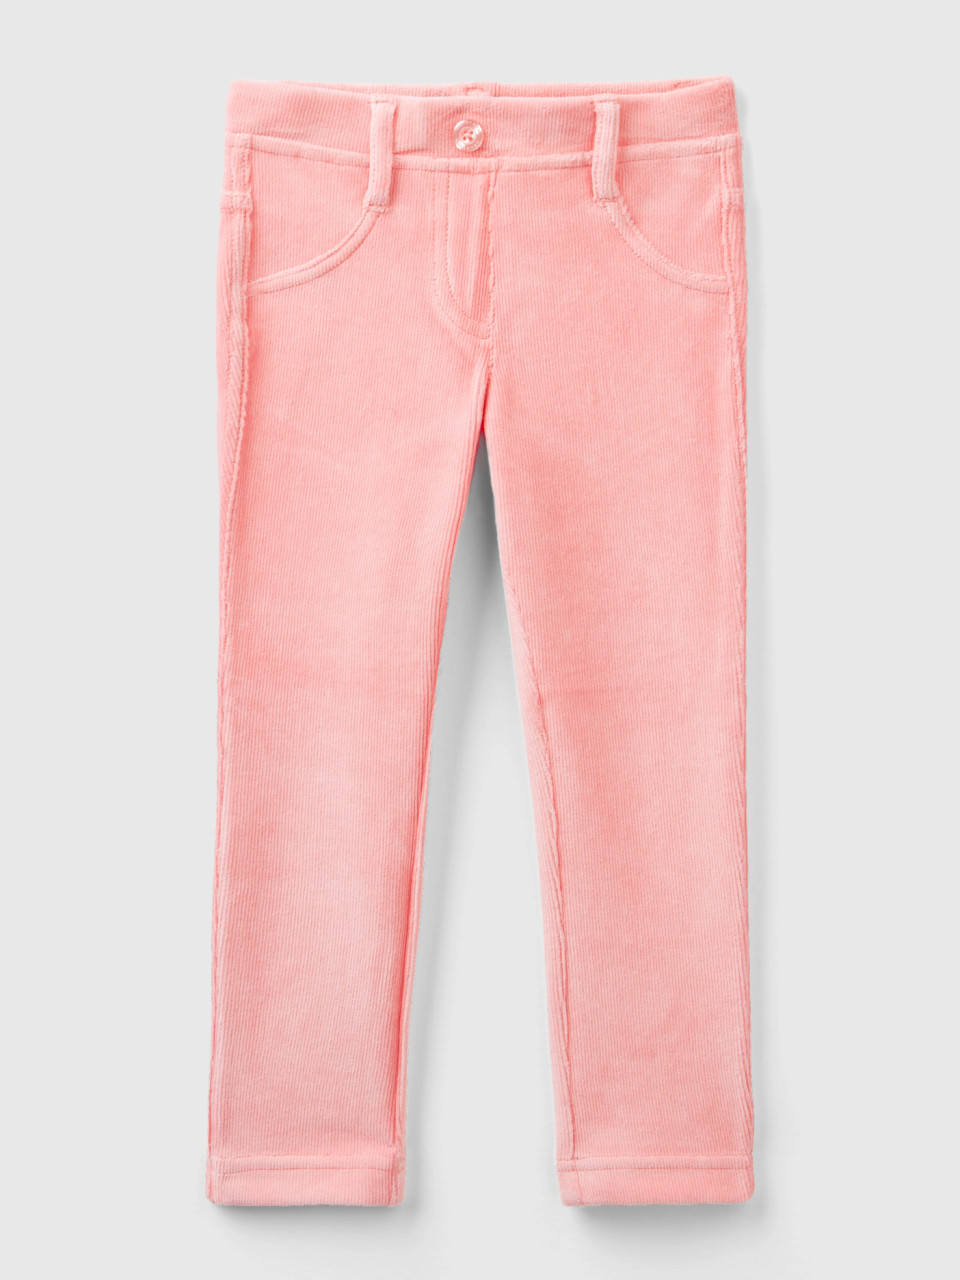 Benetton, Ribbed Chenille Trousers, Pink, Kids